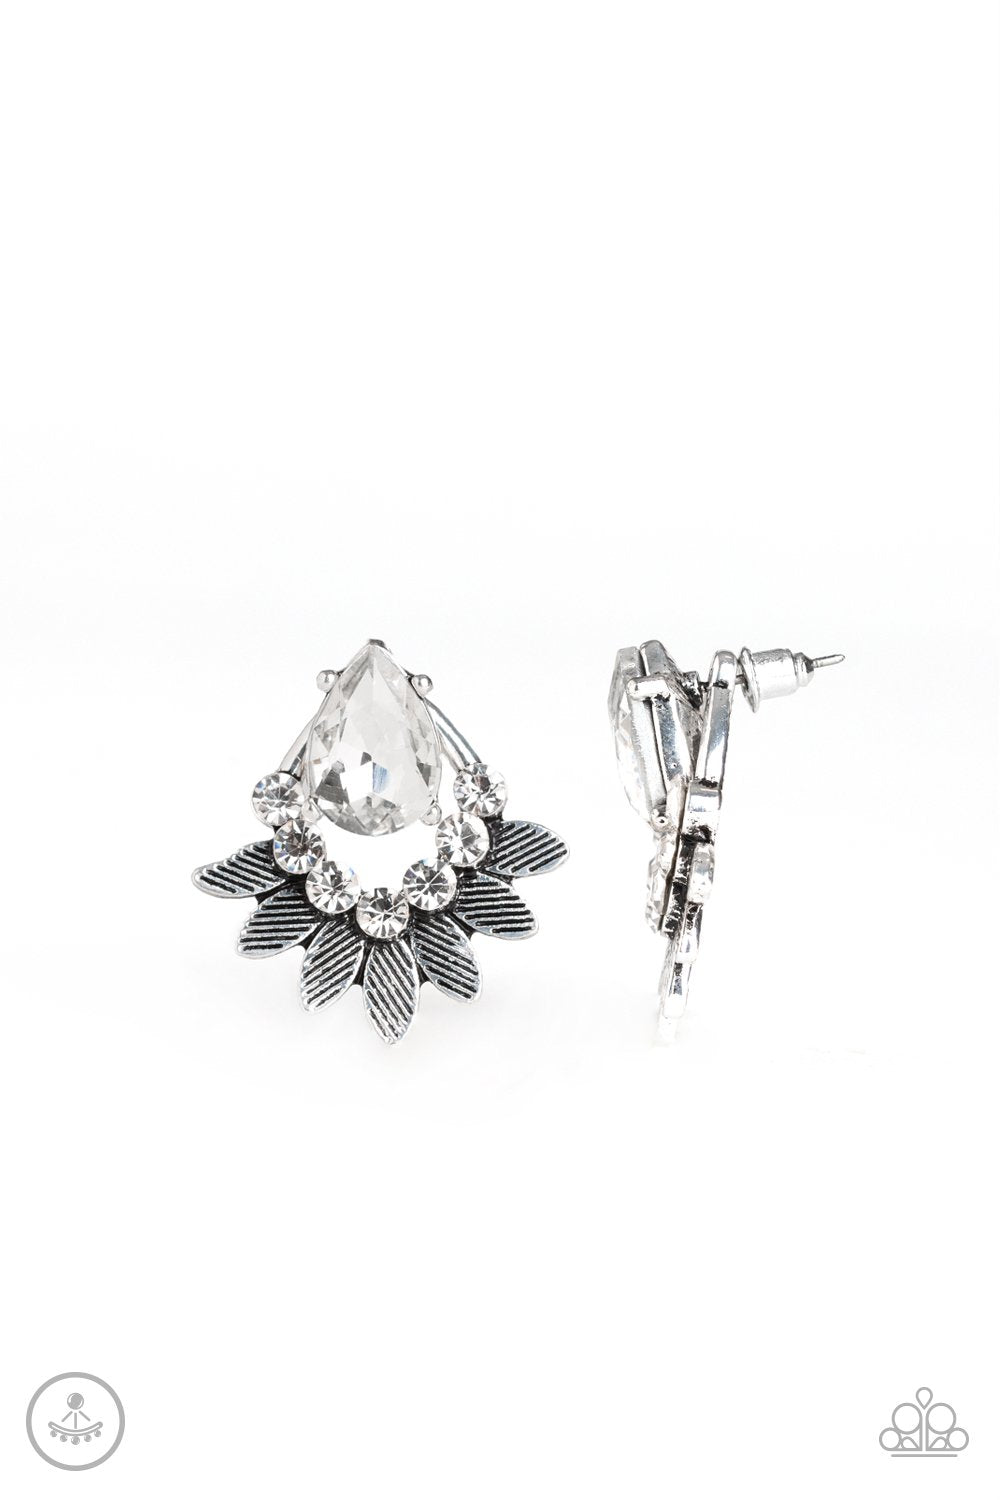 Crystal Canopy White Rhinestone double-sided Post Earrings - Paparazzi Accessories - lightbox -CarasShop.com - $5 Jewelry by Cara Jewels